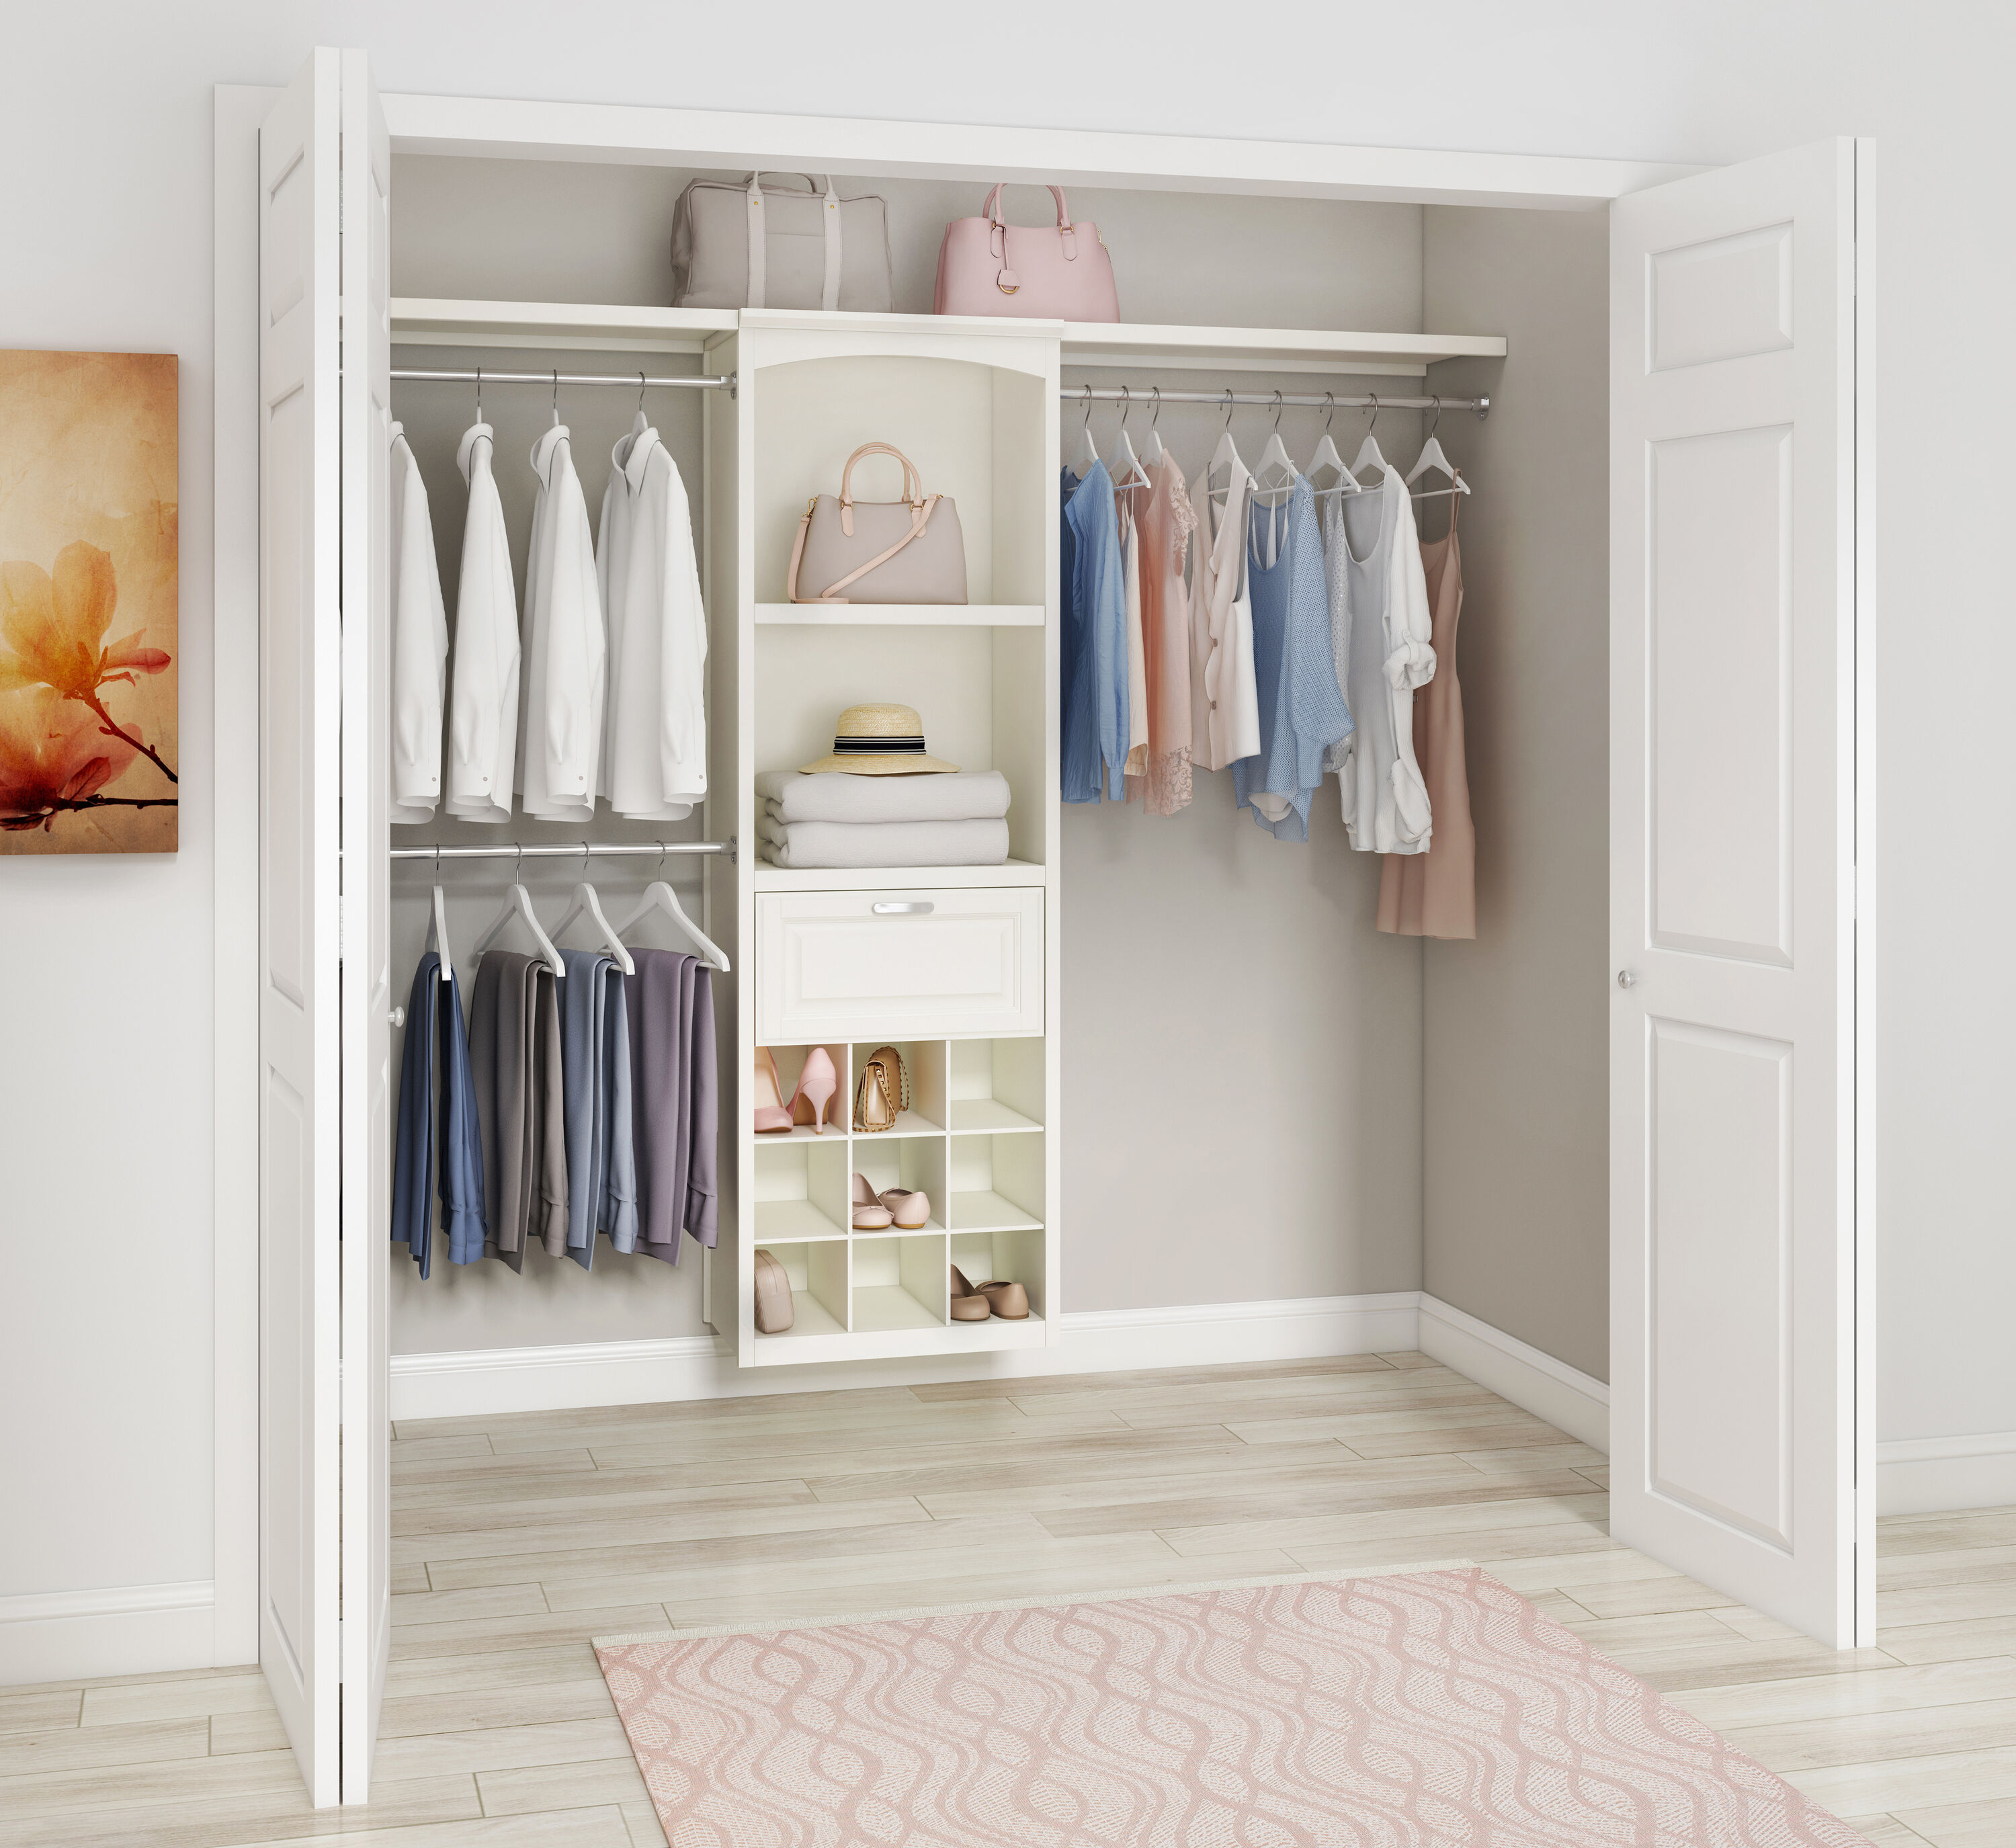 allen + roth Hartford 2-ft to 8-ft W x 6.83-ft H Antique White Solid  Shelving Wood Closet System in the Wood Closet Kits department at